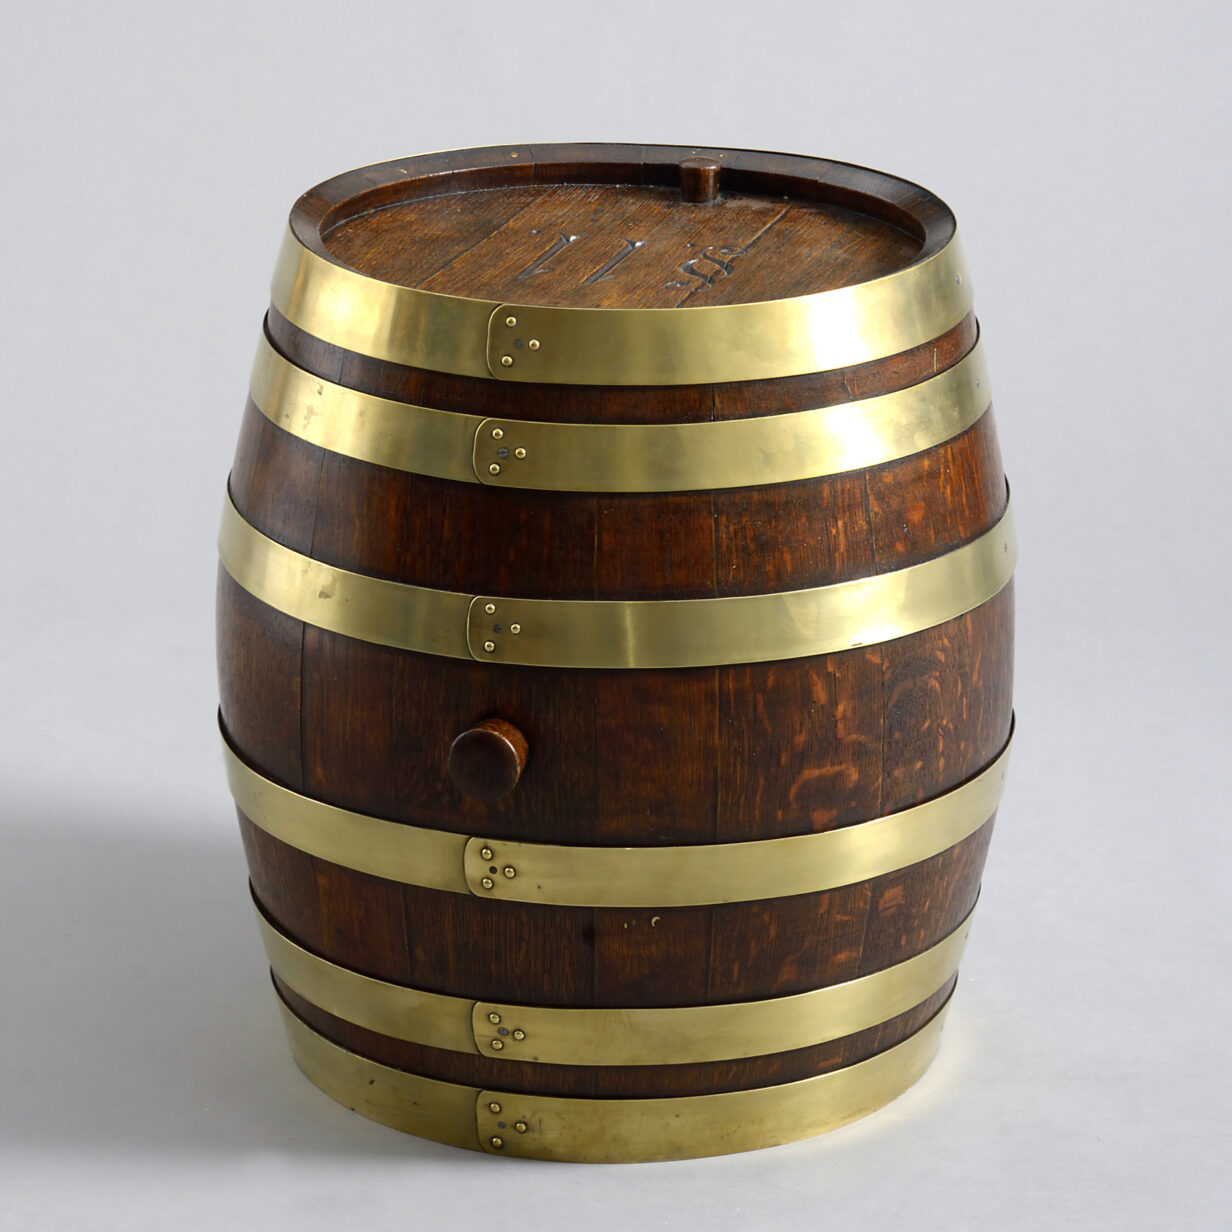 Large 19th century oak and brass coopered novelty rum barrel